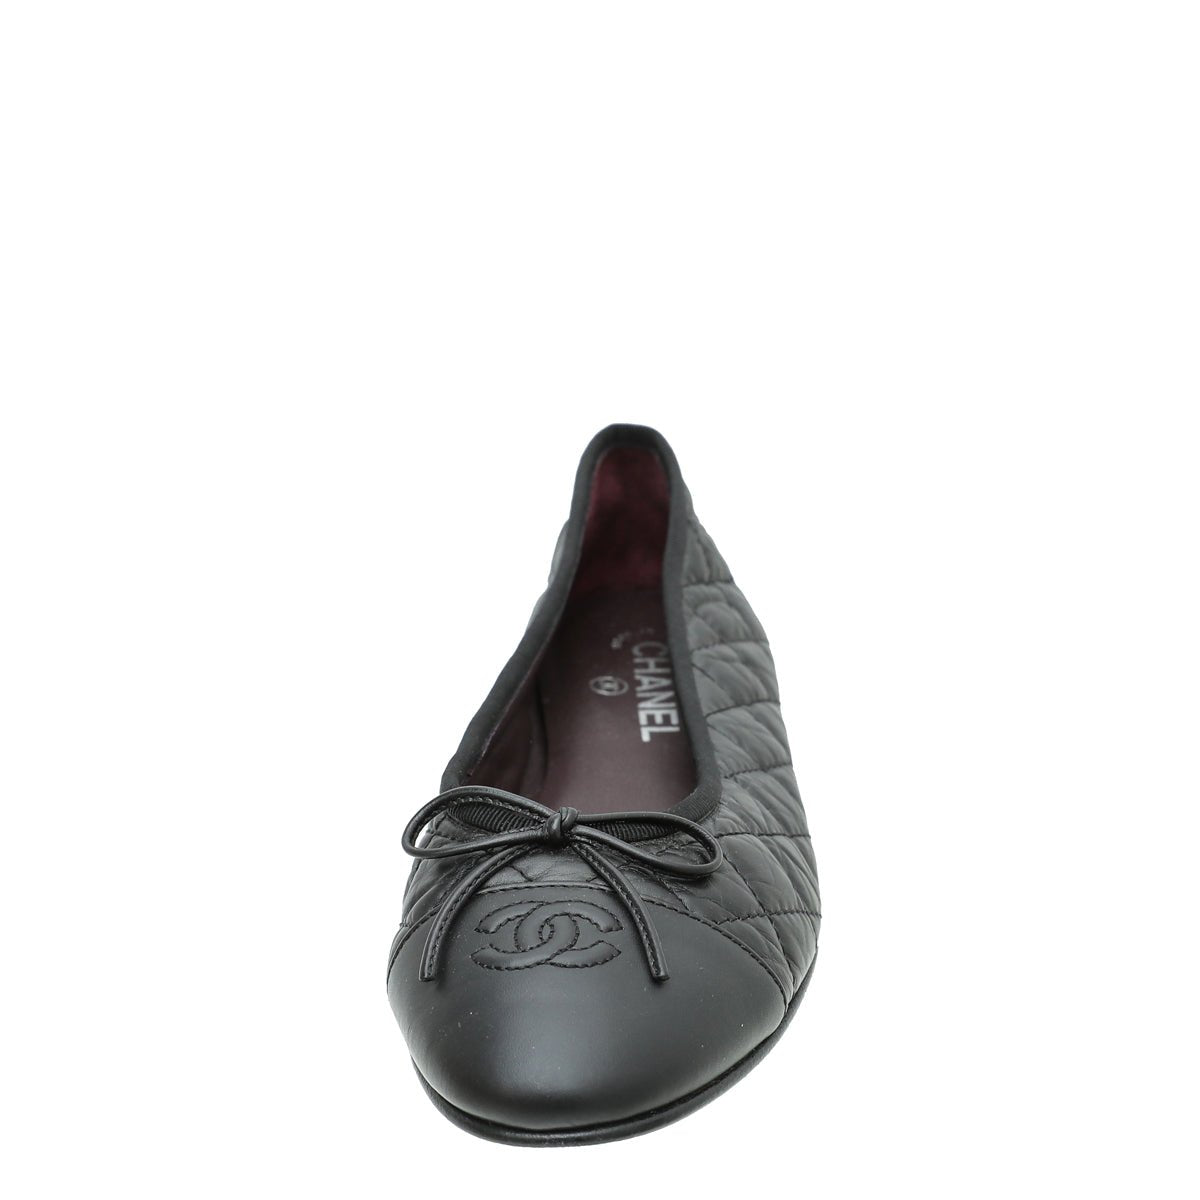 Chanel - Chanel Black Cap toe Quilted Ballerina Flats 39.5 | The Closet